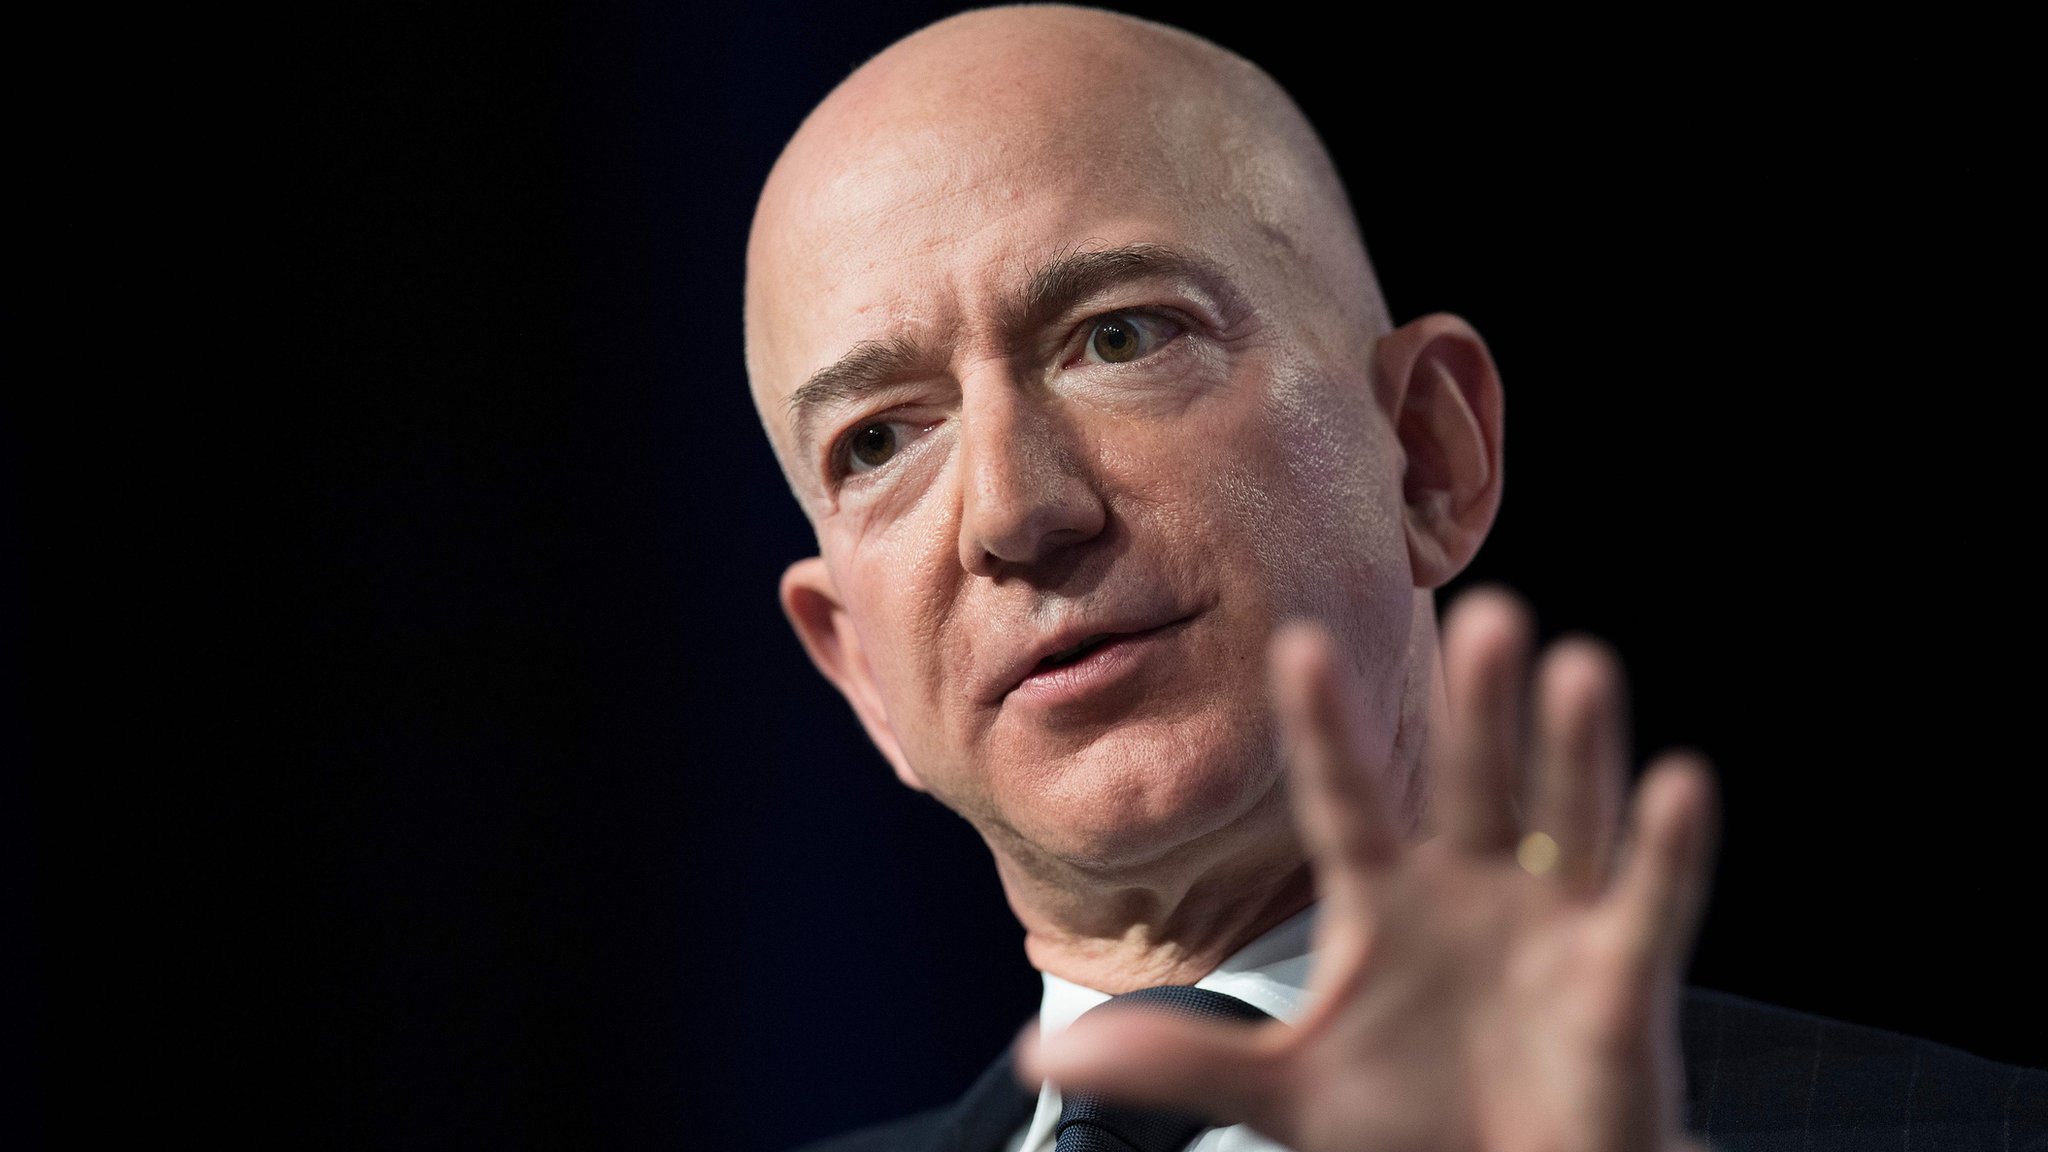 Jeff Bezos Amazon boss accuses National Enquirer of blackmail pic